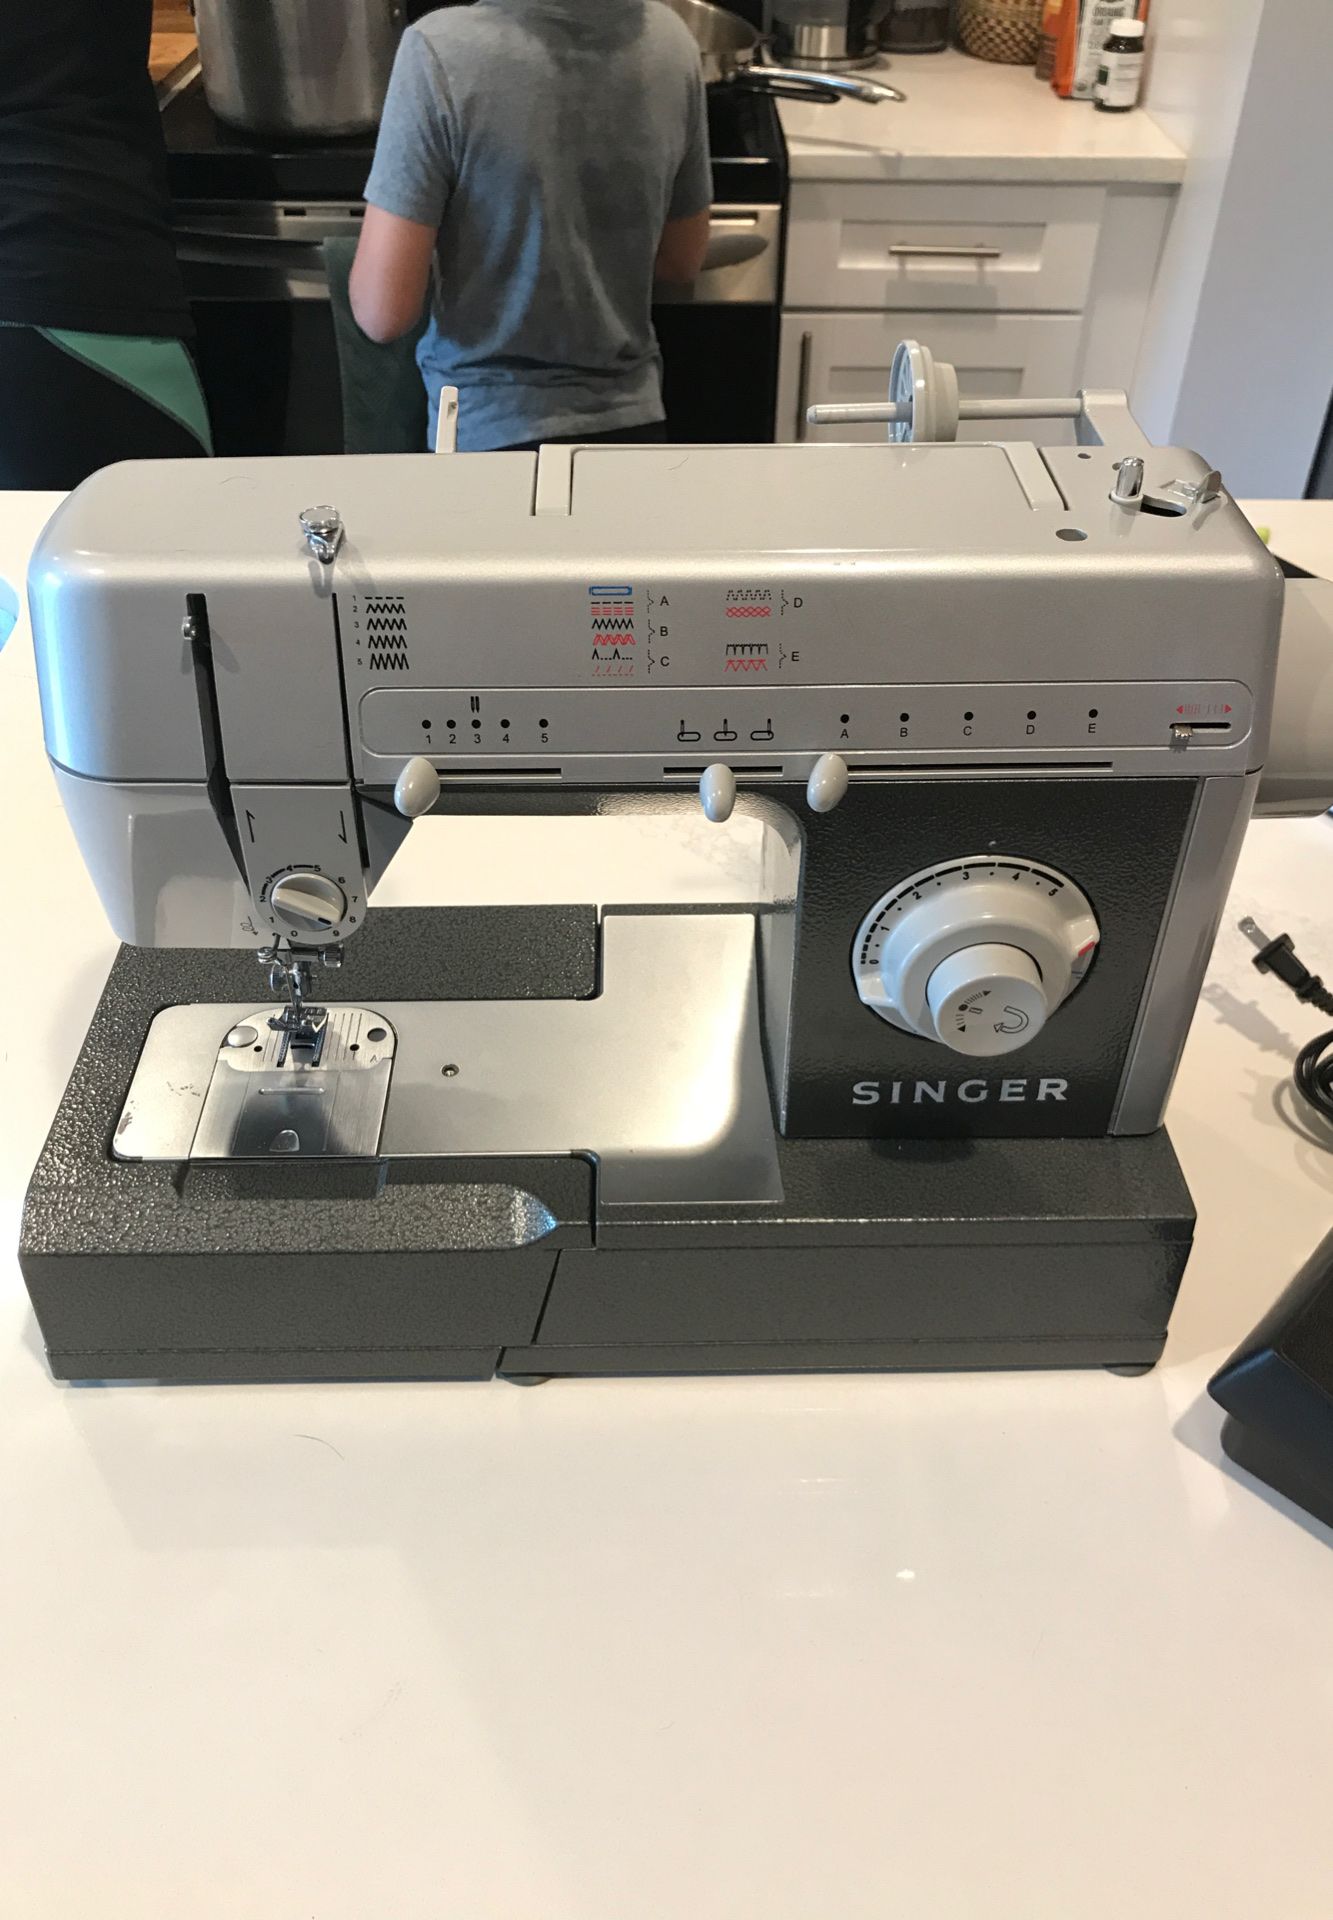 Singer CG-550 C (Commercial Sewing Machine)